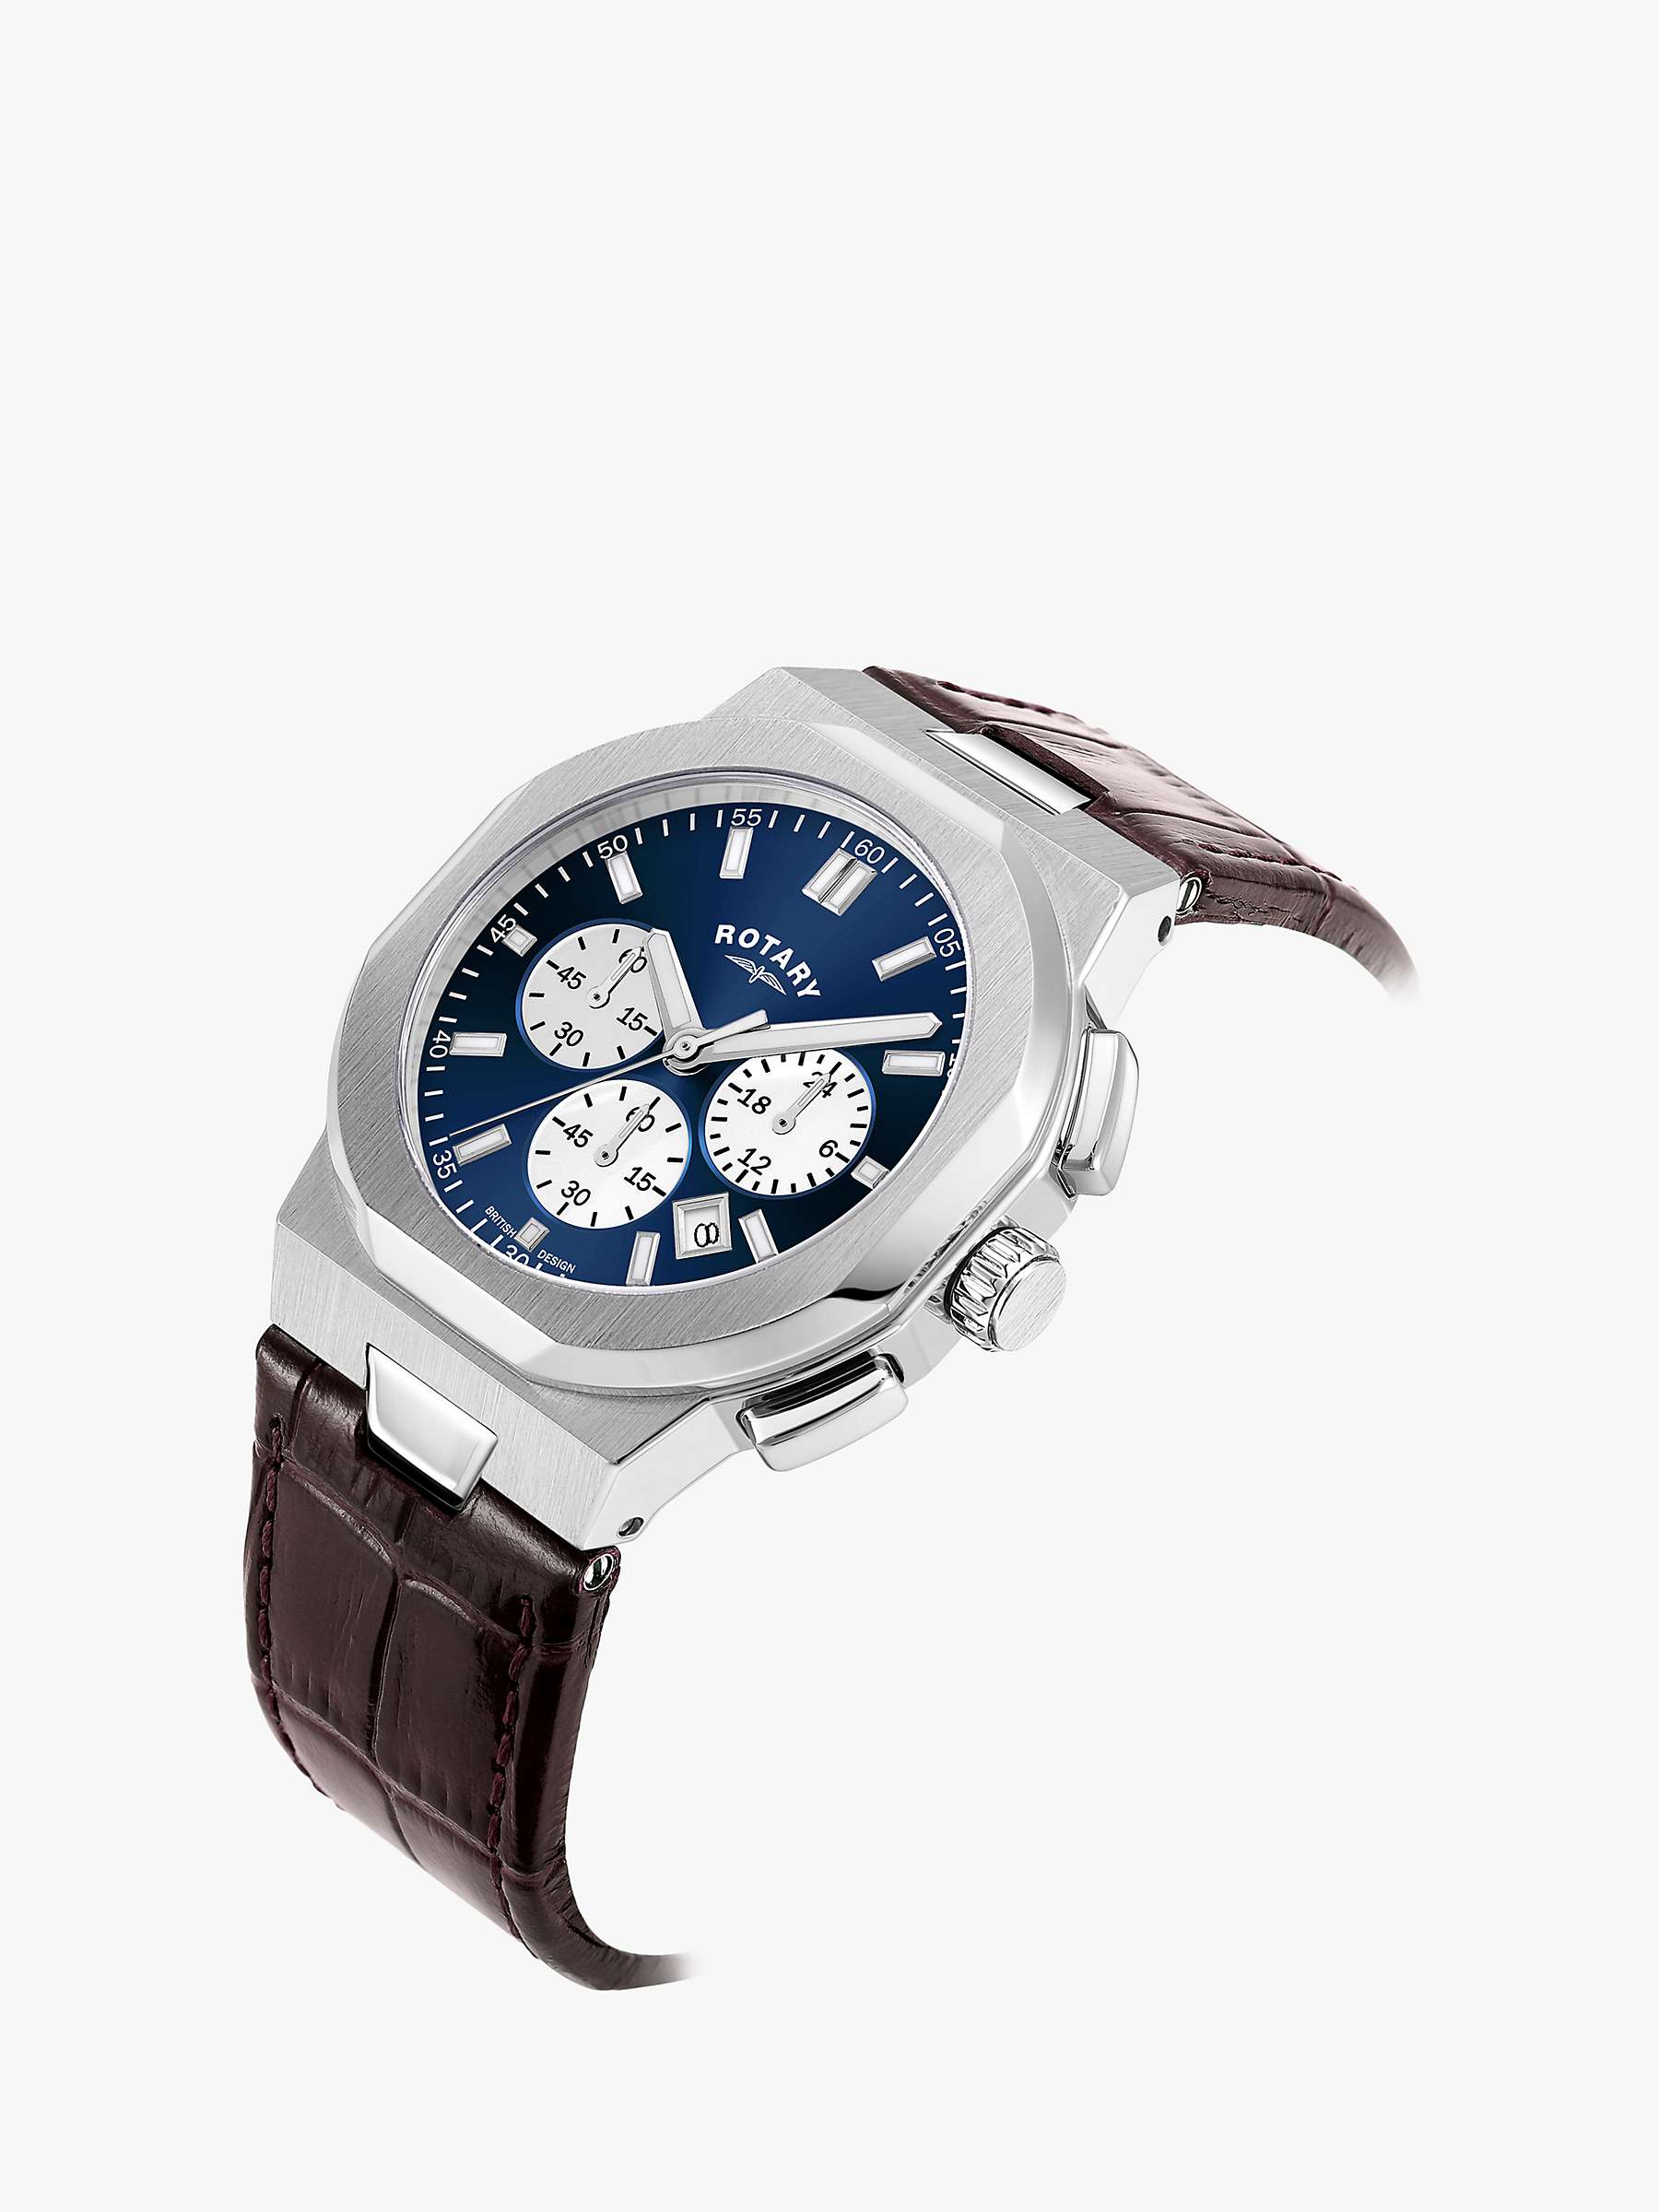 Buy Rotary GS05450/05 Men's Regent Chronograph Date Leather Strap Watch, Silver/Blue Online at johnlewis.com